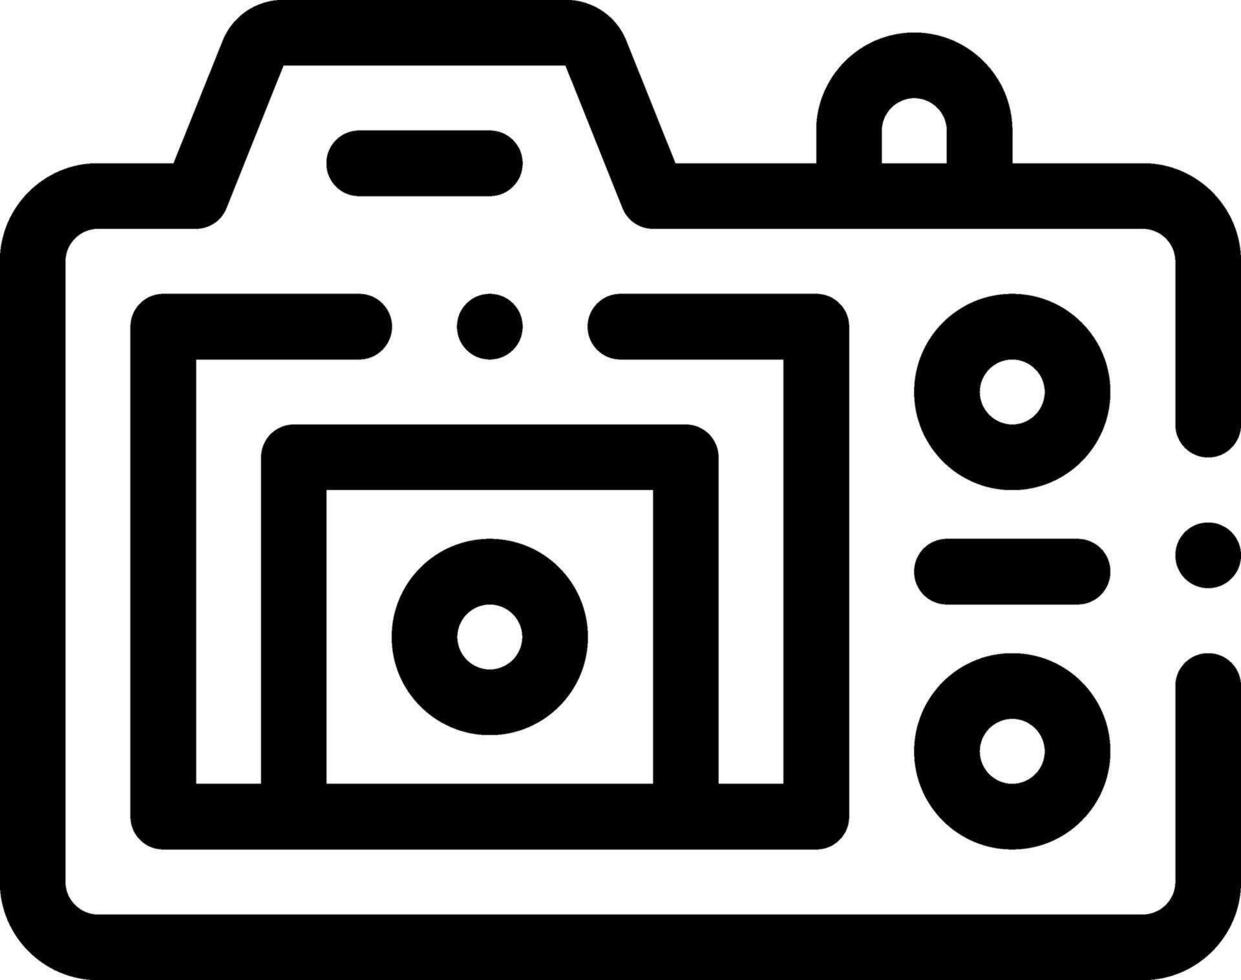 this icon or logo camera icon or other where it explaints type camera type or camera type and others or design application software vector